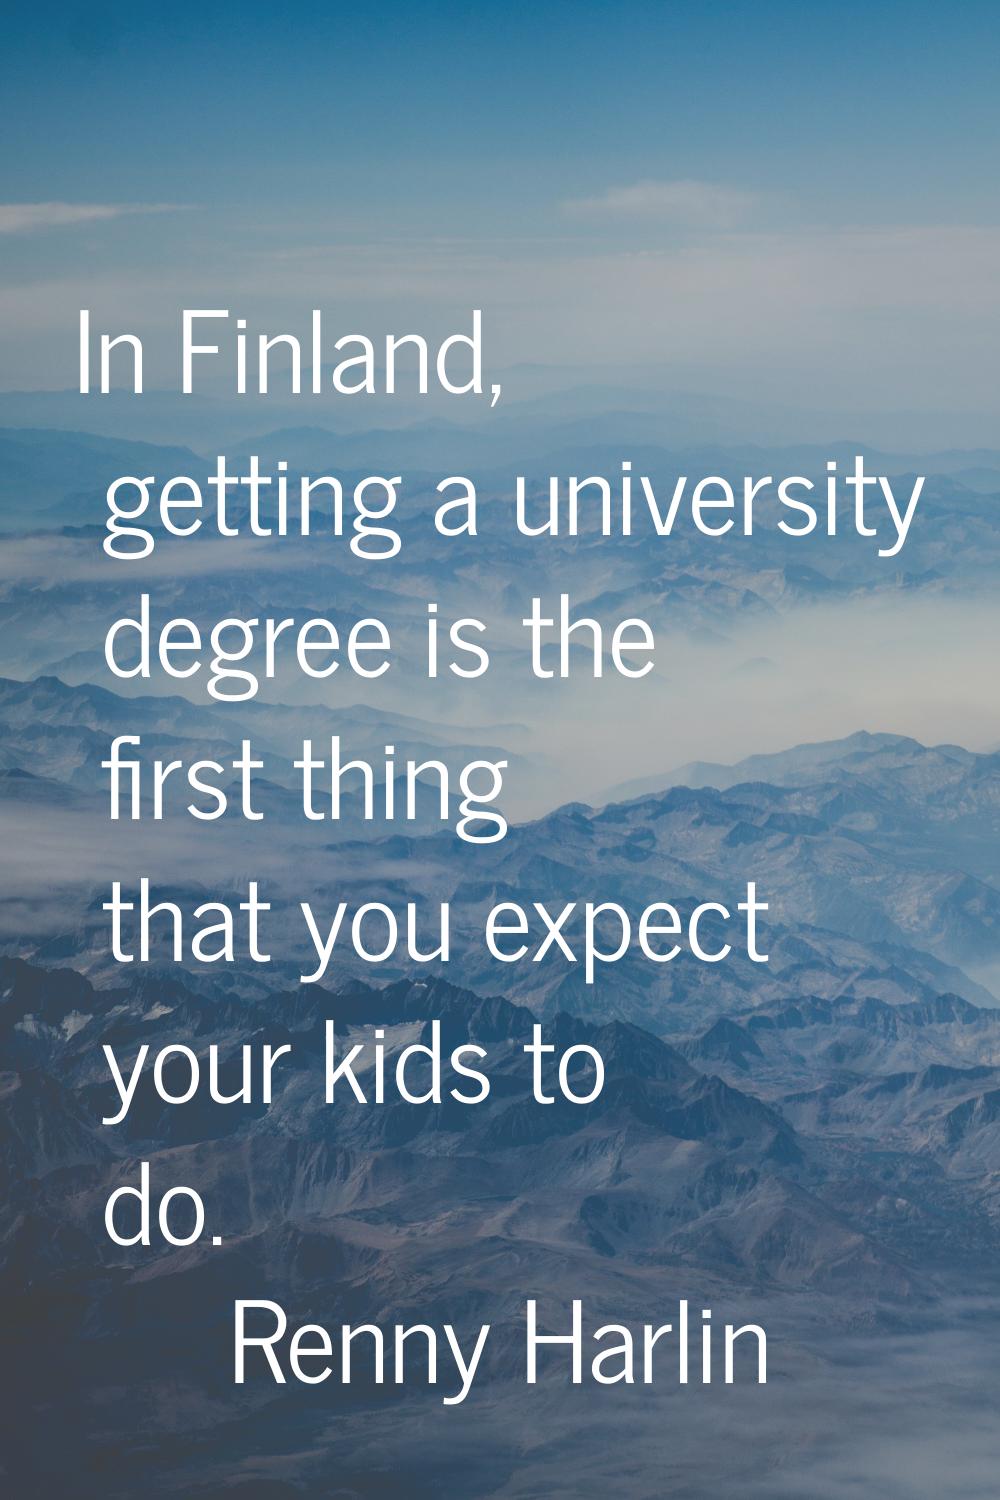 In Finland, getting a university degree is the first thing that you expect your kids to do.